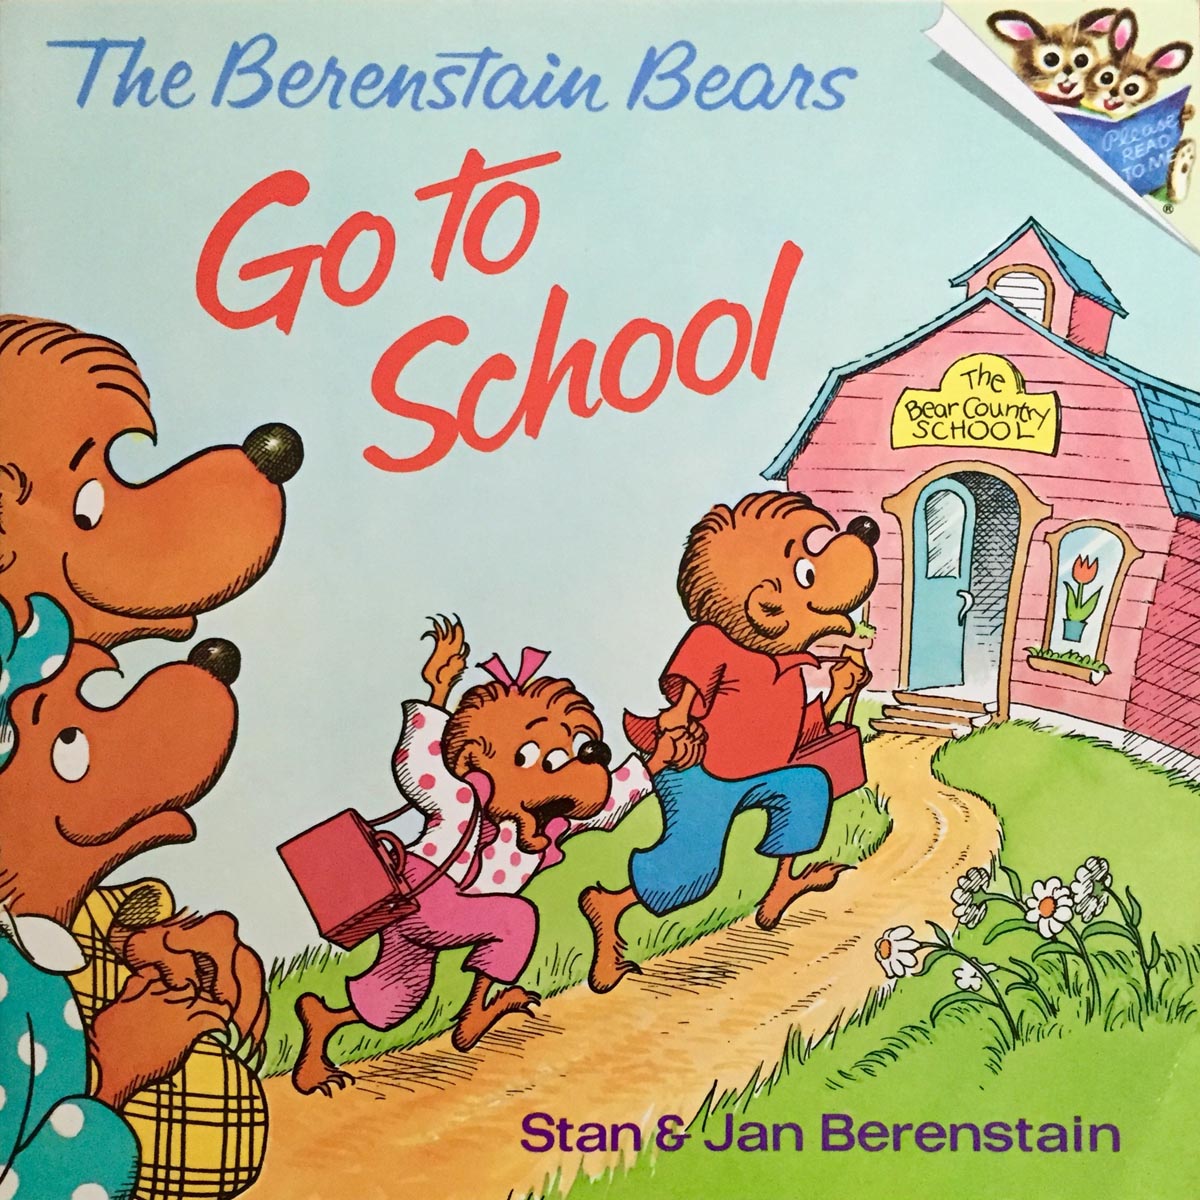 Cover of “The Berenstain Bears Go to School”